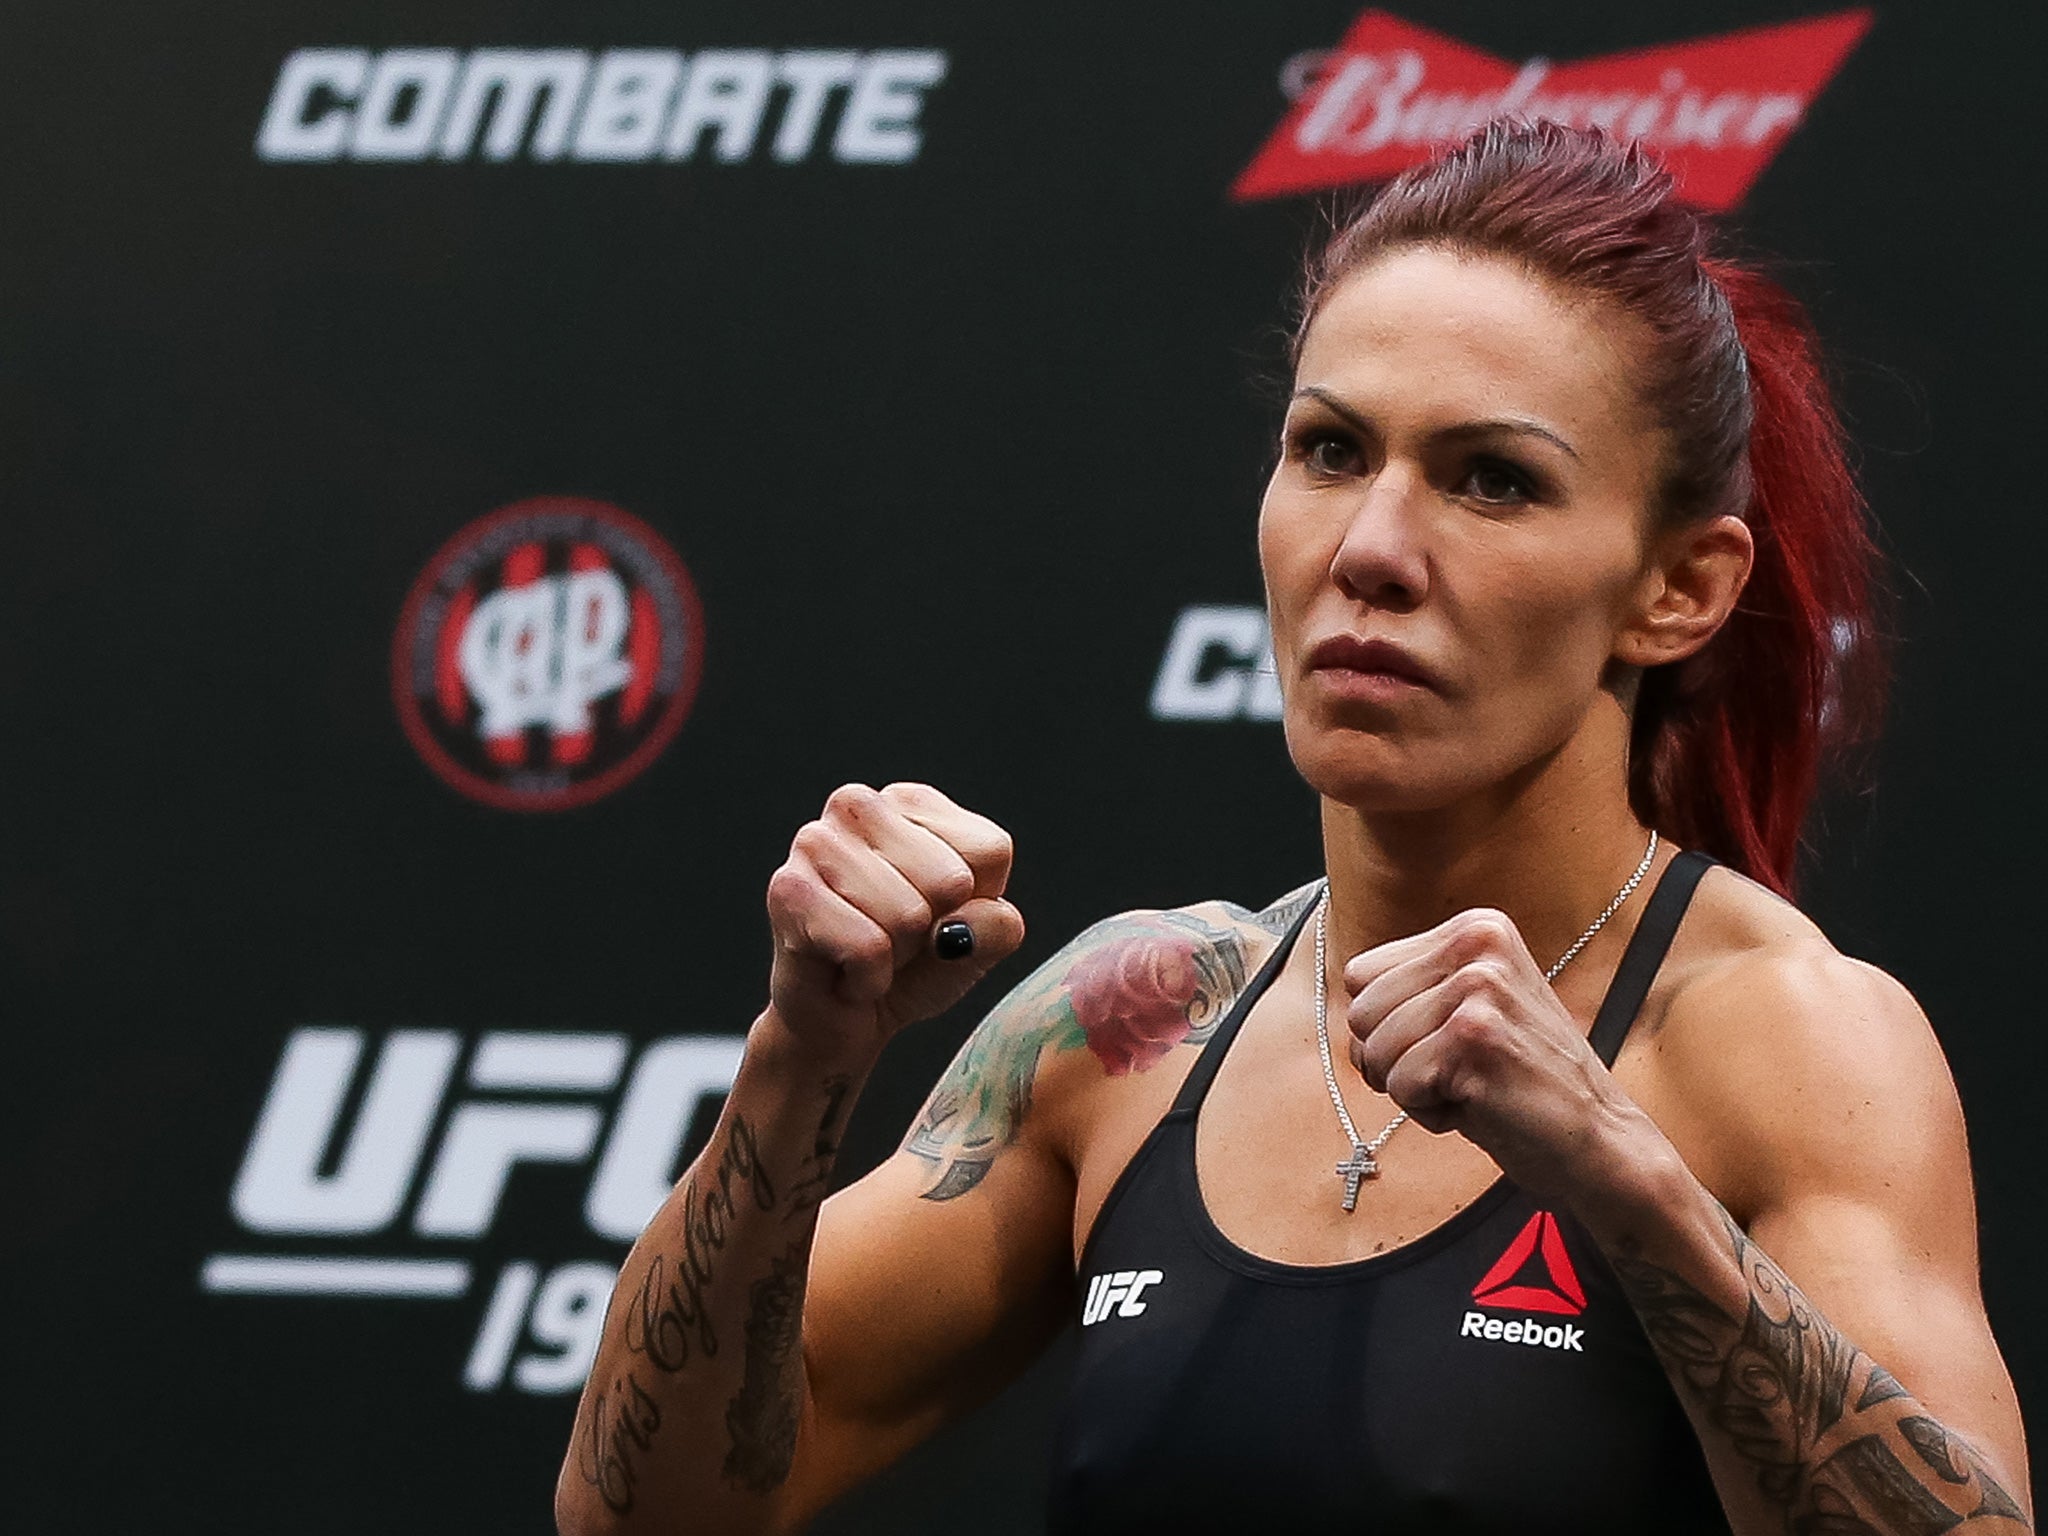 Cyborg is the scariest woman in all of mixed martial arts